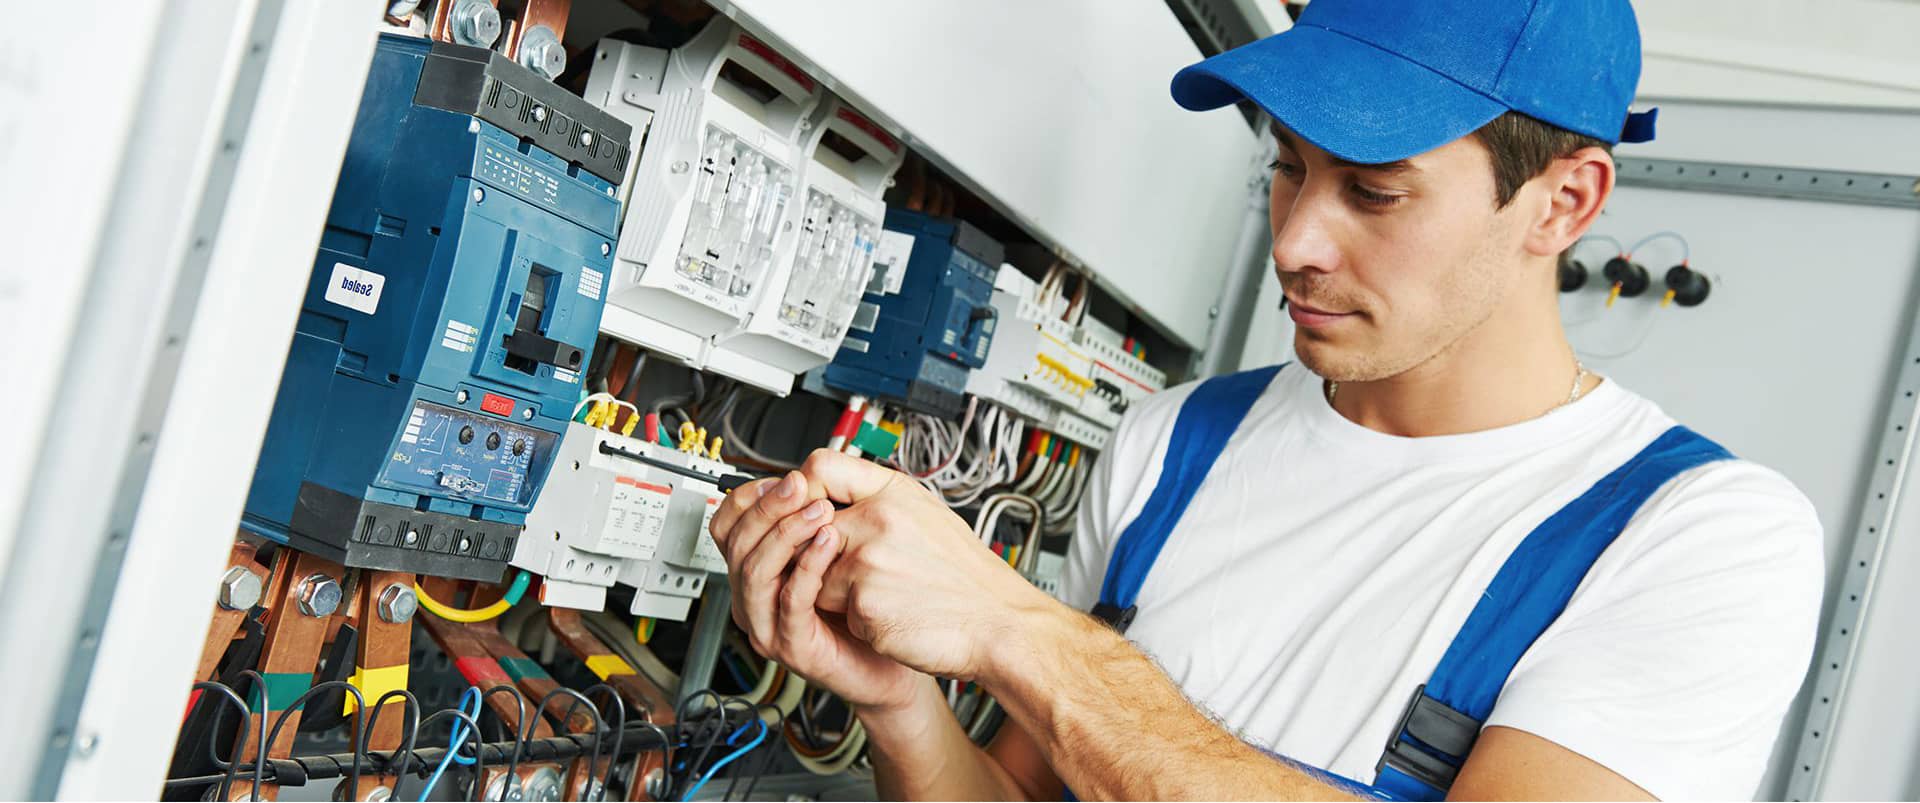 Aurora, Naperville and Bolingbrook Electrician